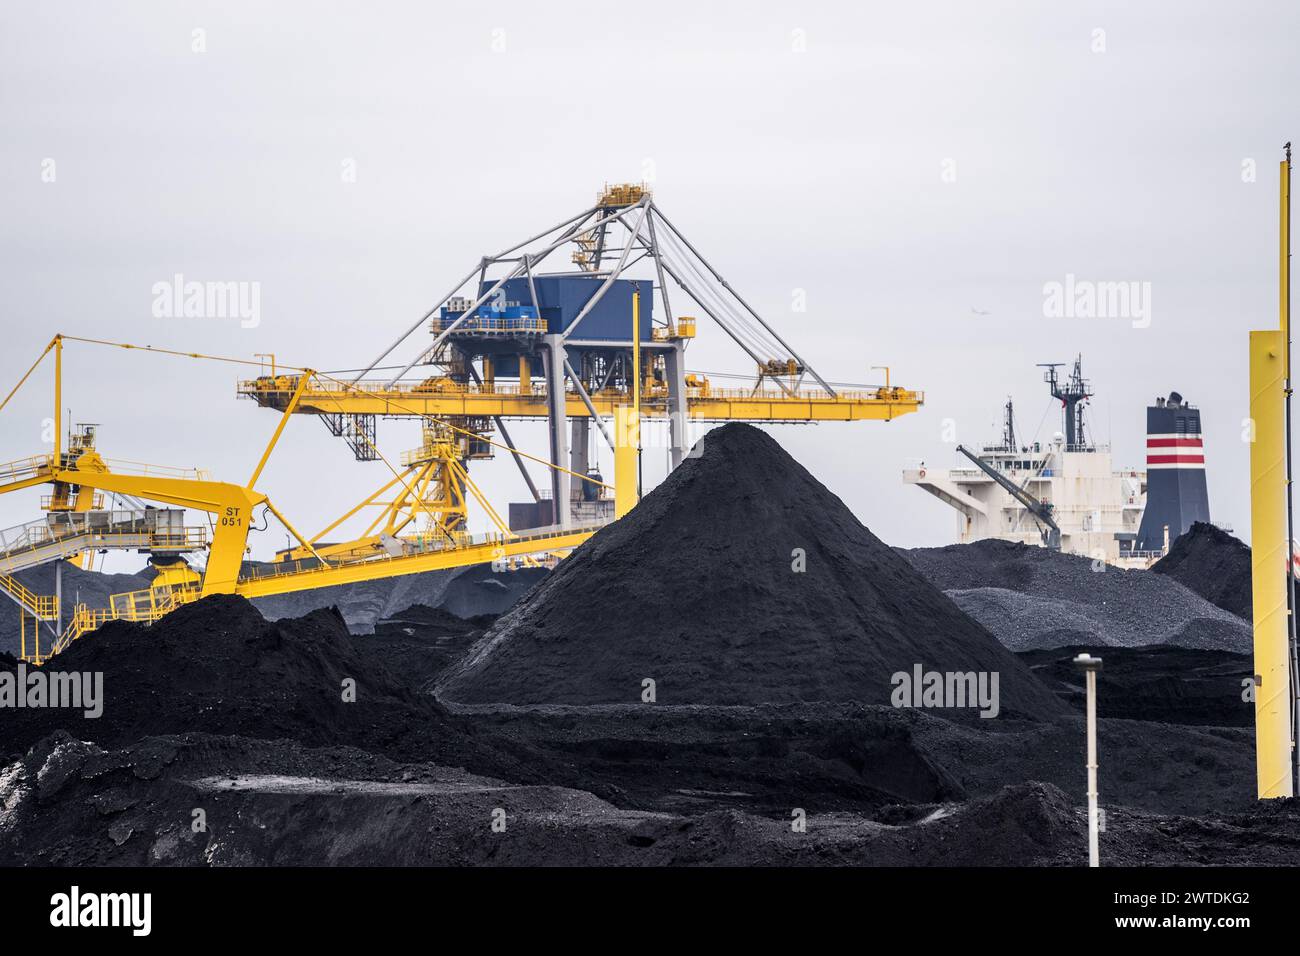 IJMUIDEN - Steel factory Tata Steel Netherlands. Various organizations have gone to court to object to a permit under the Nature Management Act, which Tata Steel has received for the construction of an artificial dune made of steel slag. ANP JEROEN JUMELET netherlands out - belgium out Credit: ANP/Alamy Live News Stock Photo